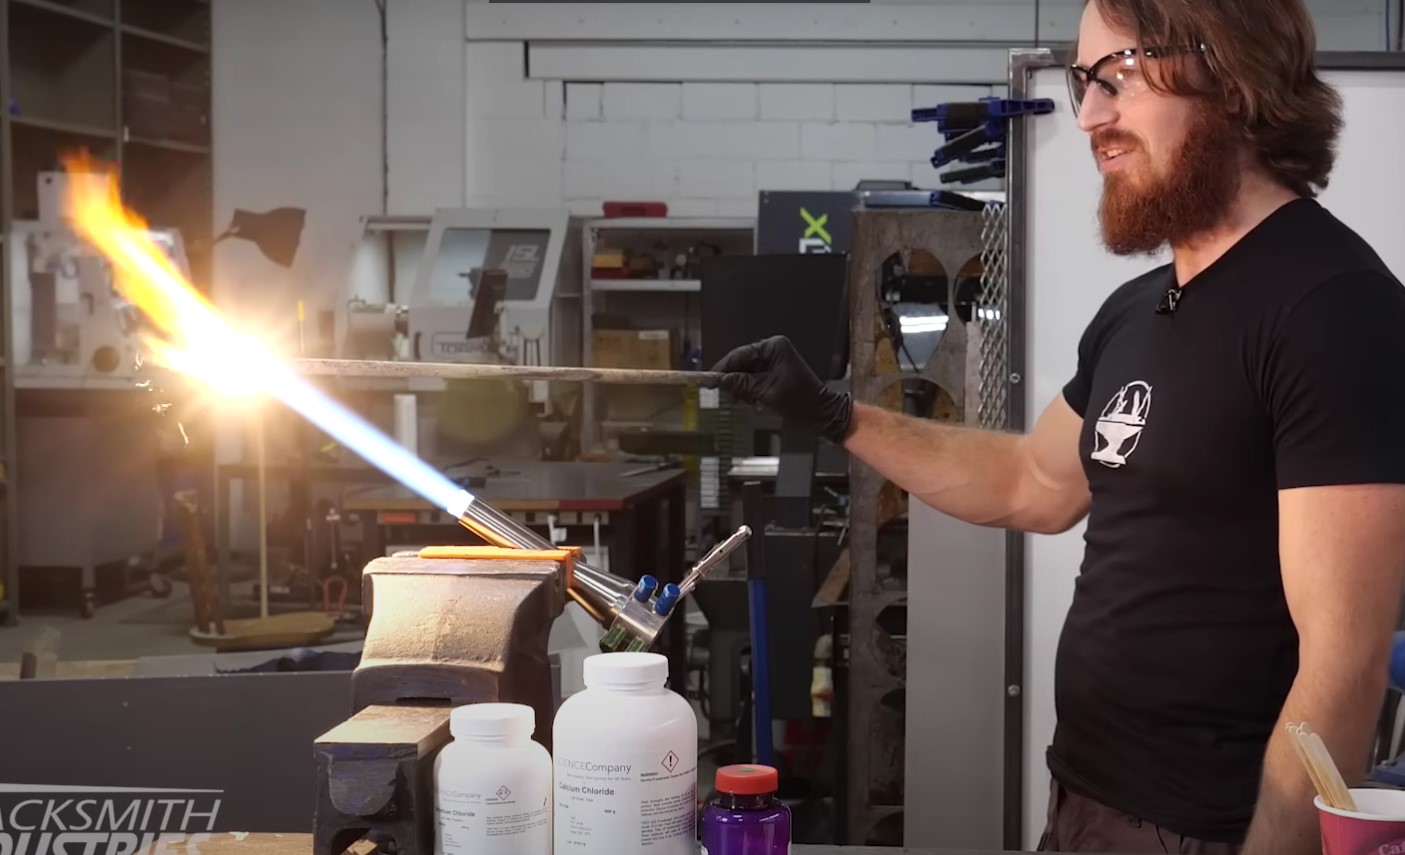 Man left people stunned after showing off 'world's first lightsaber' cutting through metal 3